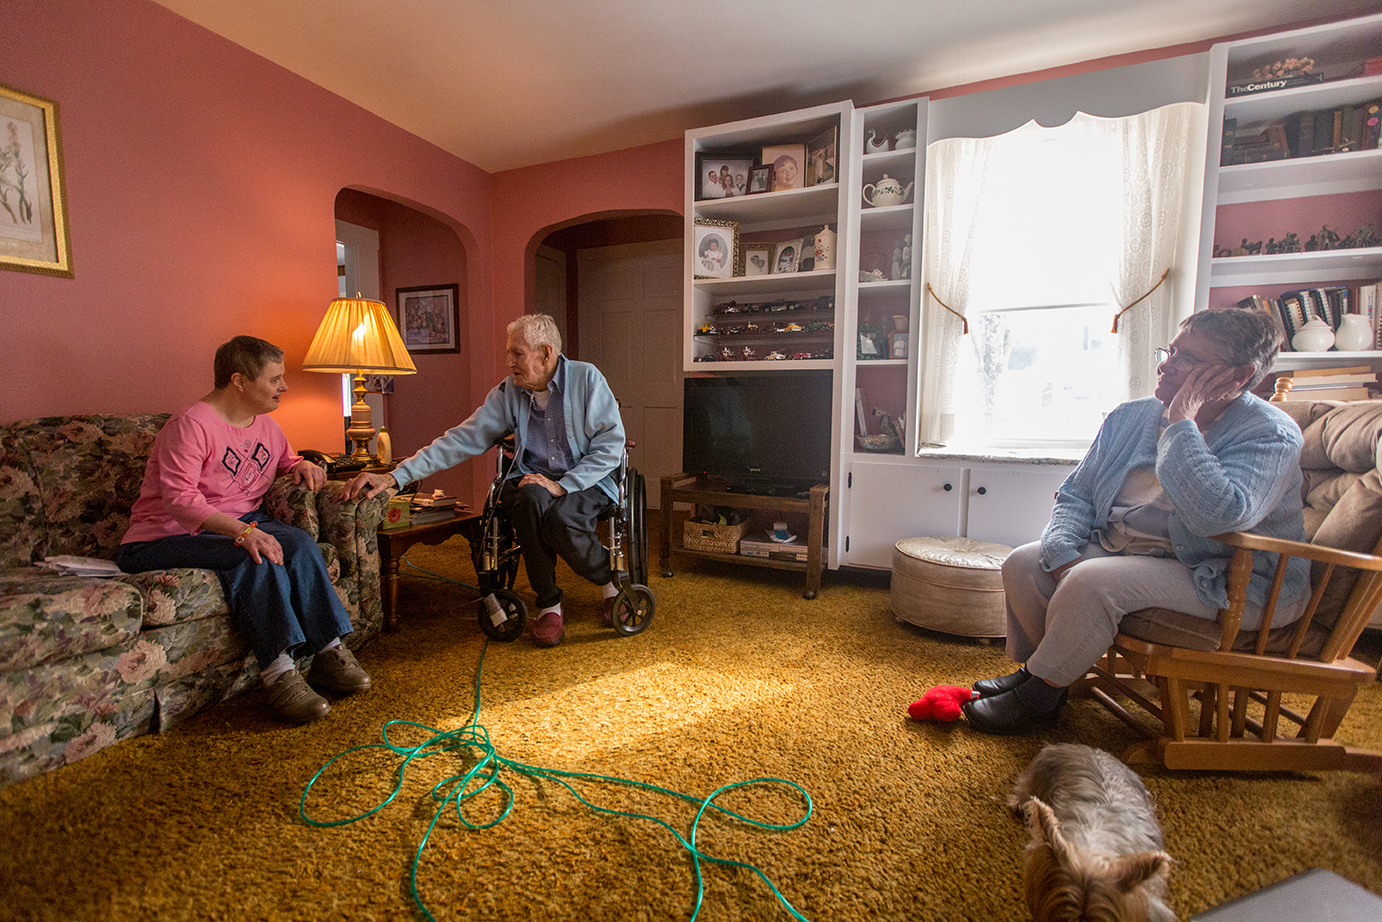  Rollin Lane, 88, sits with Kim, left, his 57-year old daughter with Down Syndrome, and Kris Zamora, right, in his Leominster home. After caring for Kim for her entire life, Rollin’s declining health has forced him to seek assistance with caring for 